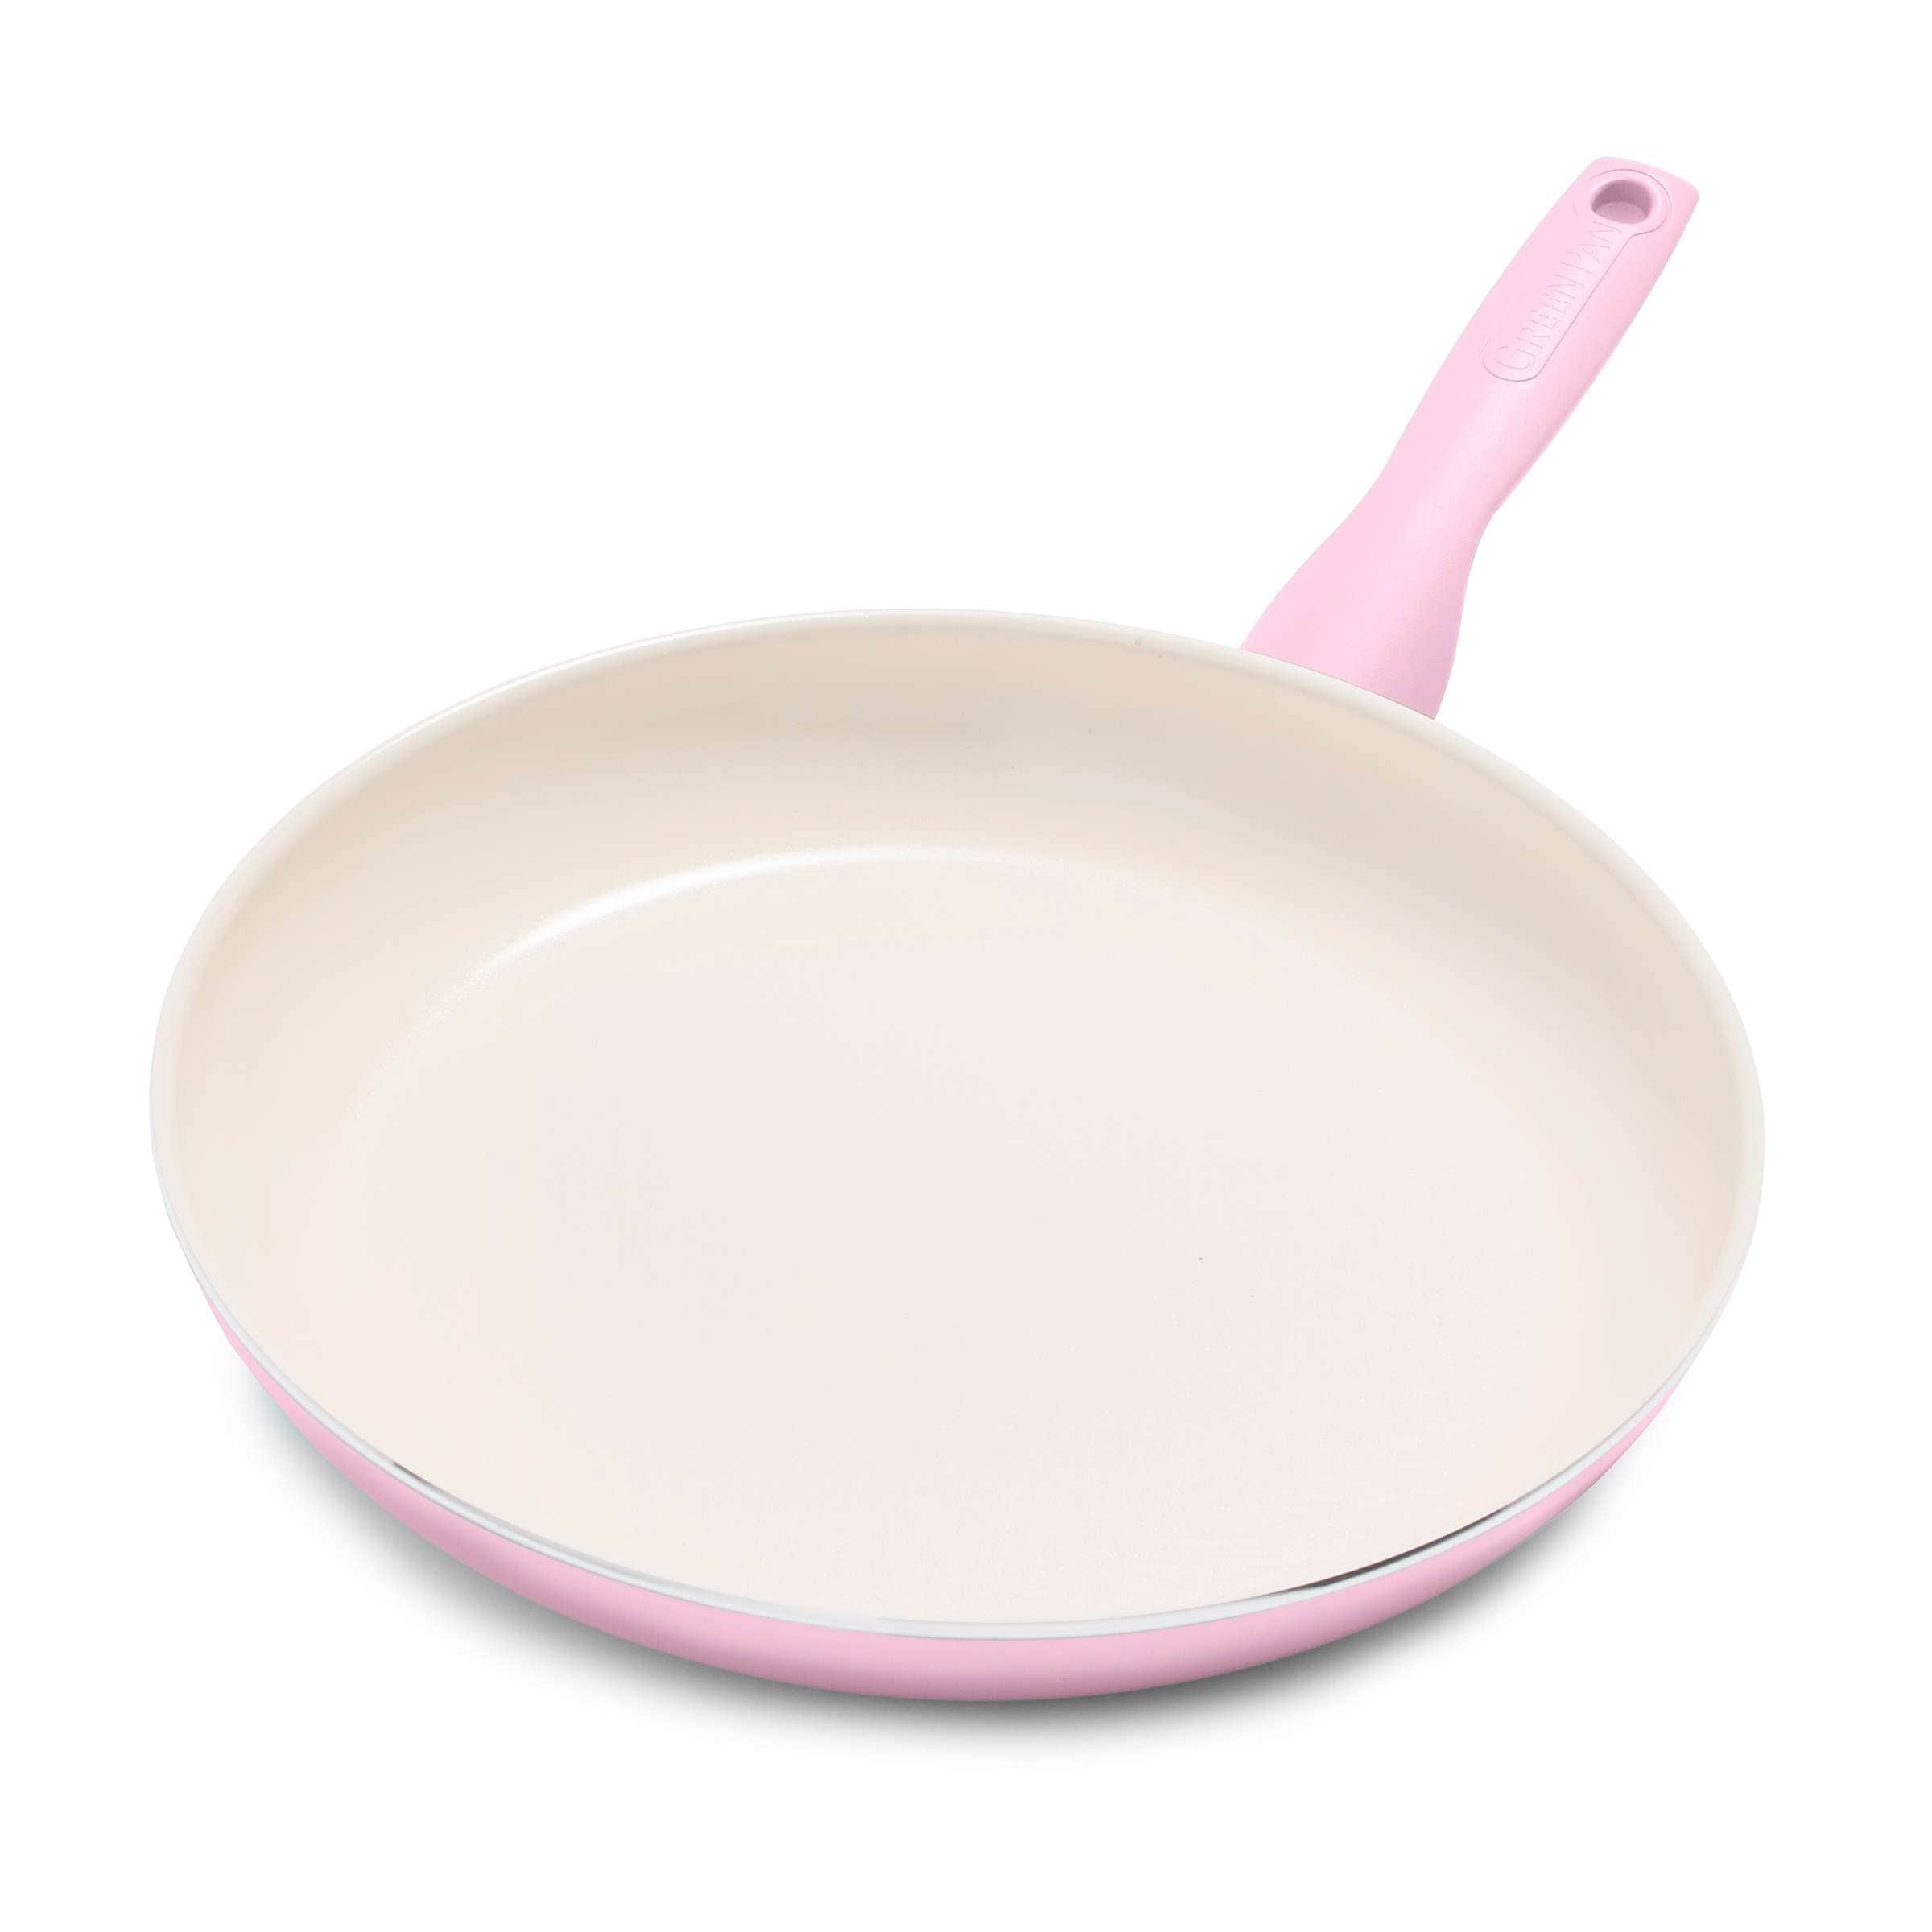 https://ak1.ostkcdn.com/images/products/is/images/direct/c110ab2c15f38a7e8aabc1a79c8bd1424a00515b/Greenpan-Rio-Healthy-Ceramic-Nonstick-12%22-Frying-Pan-Skillet.jpg